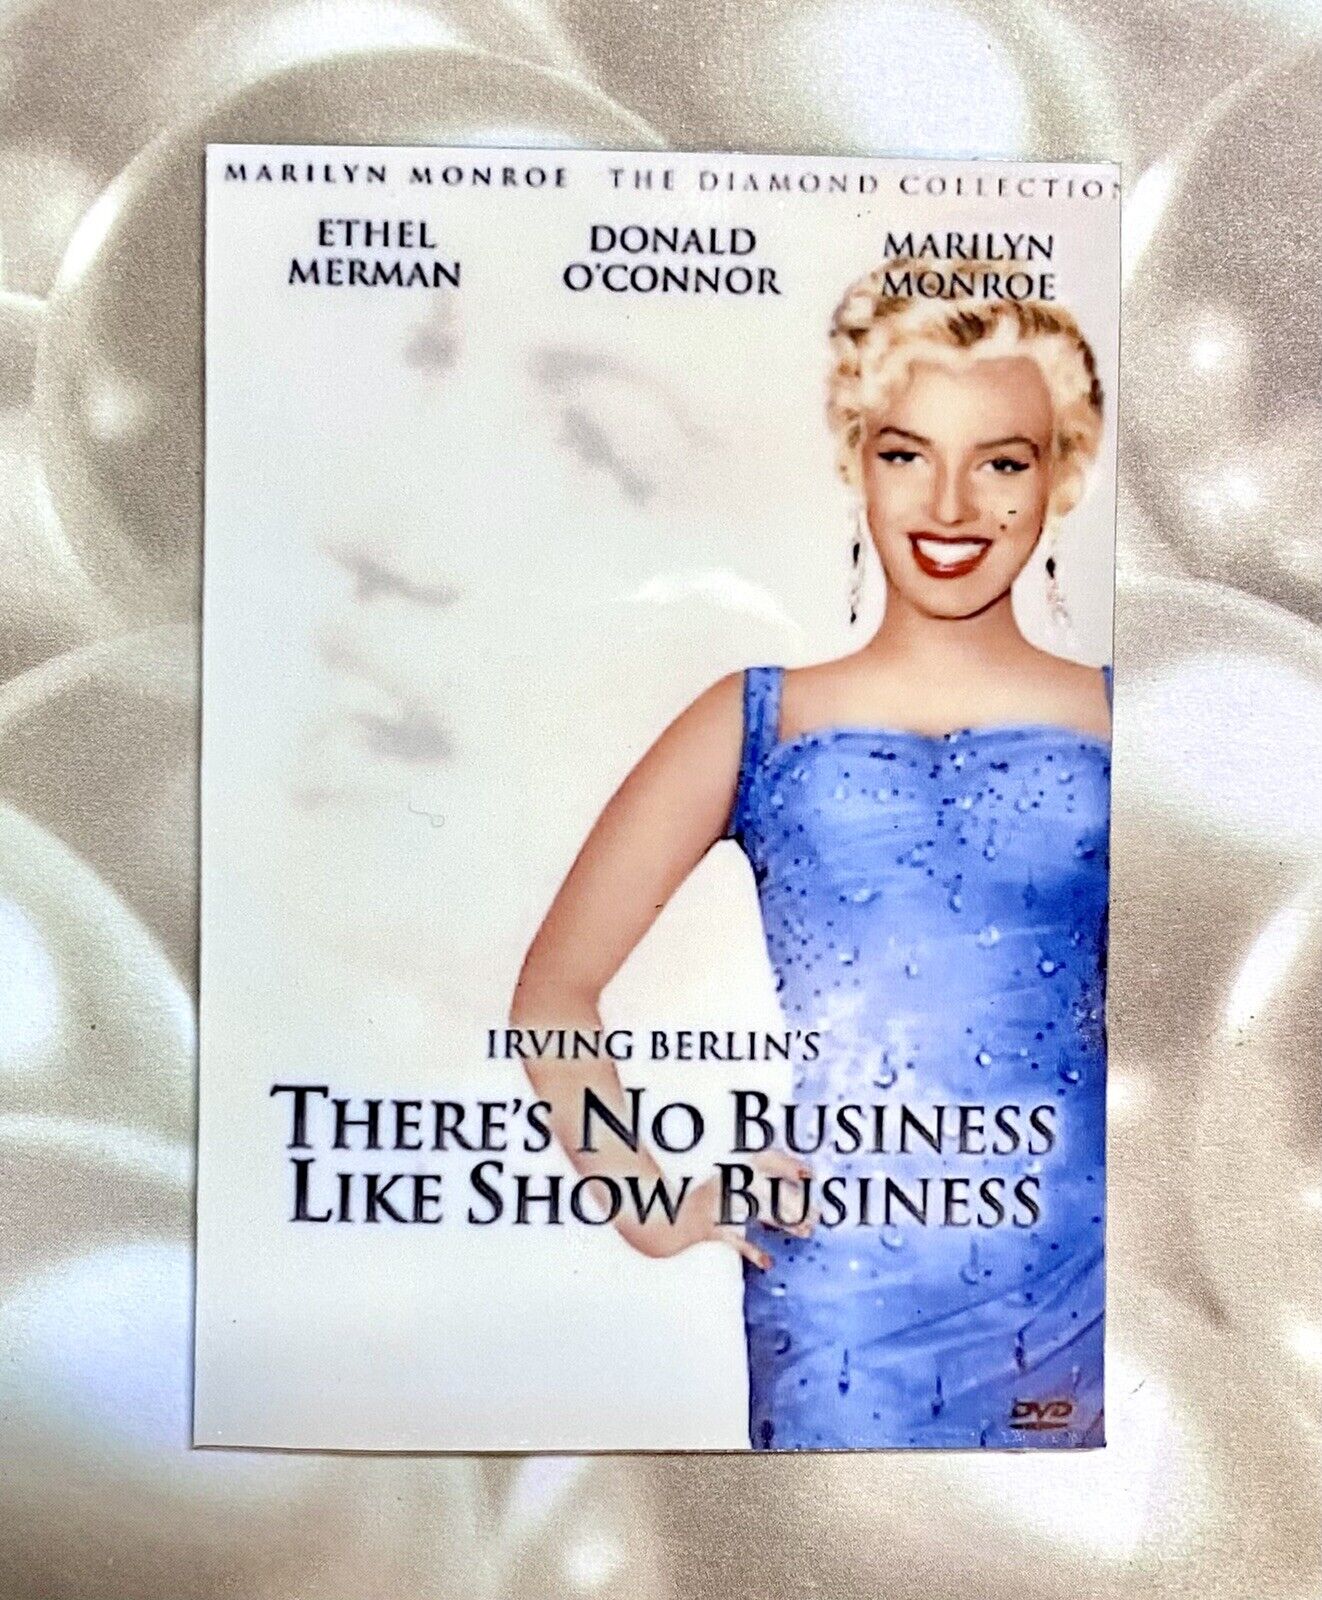 Marilyn Monroe Dvd Promo Magnet For “there’s No Business Like Show Business”